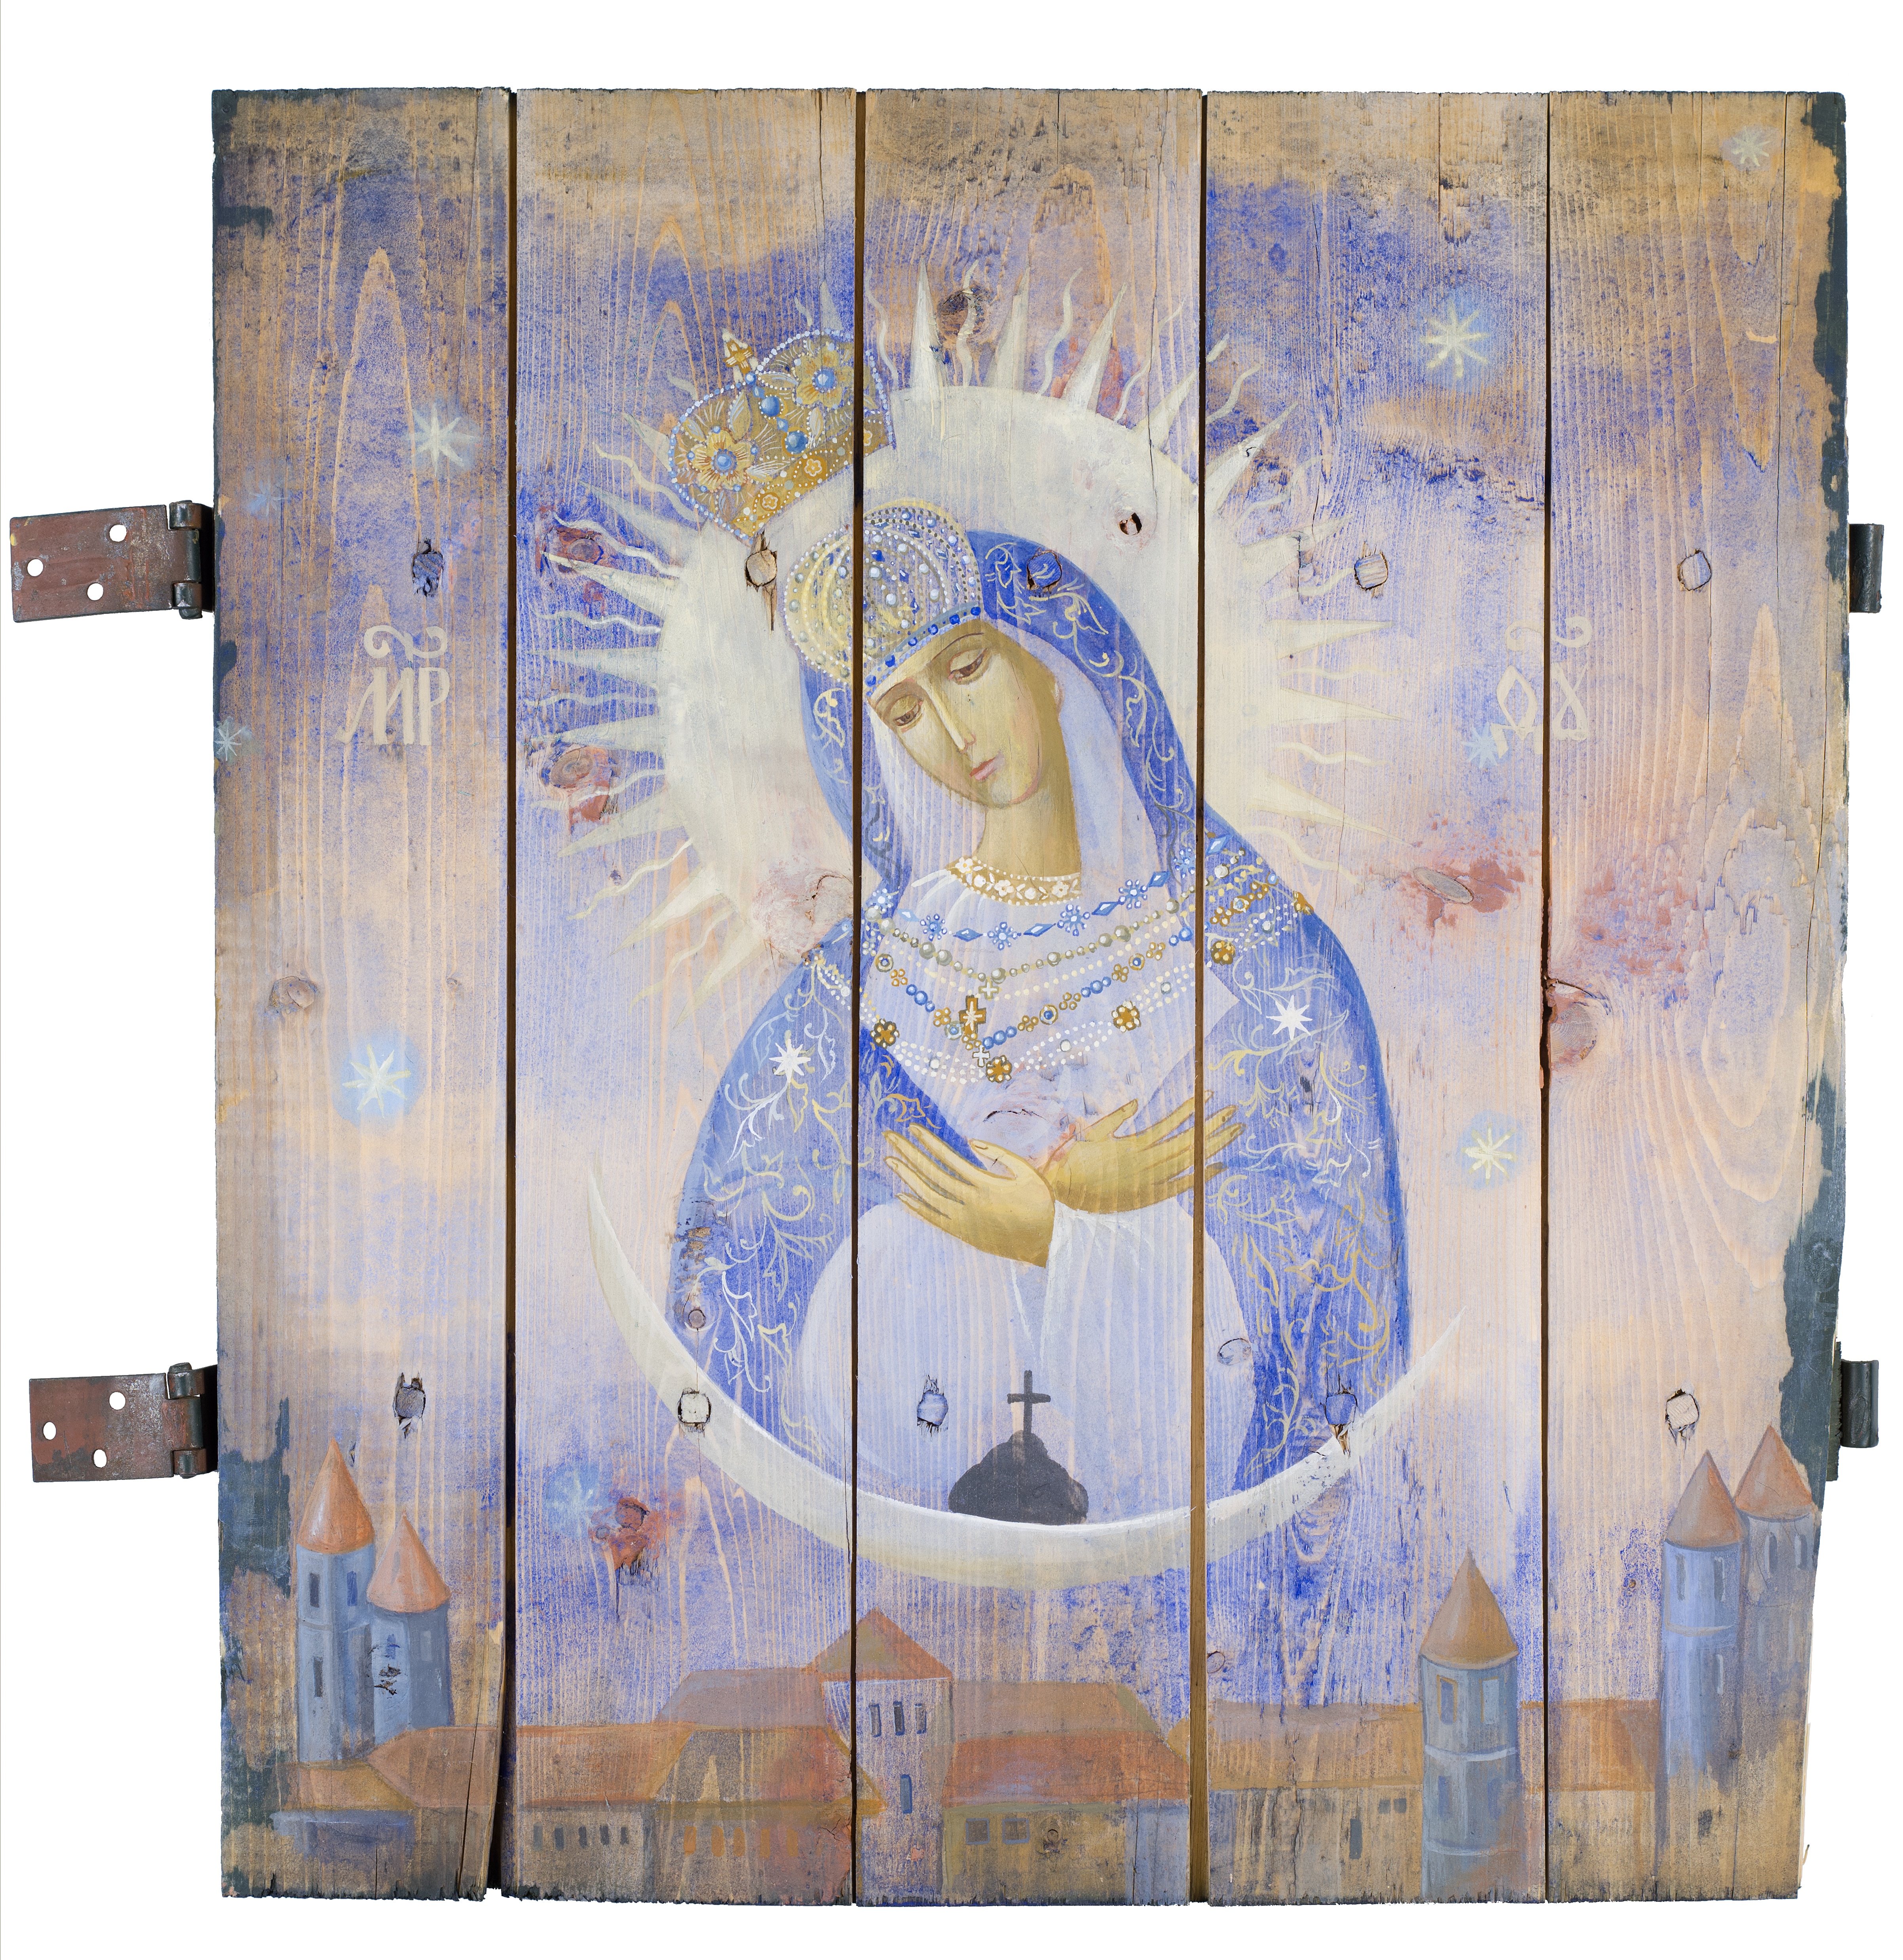 Christian icons painted on military ammo boxes